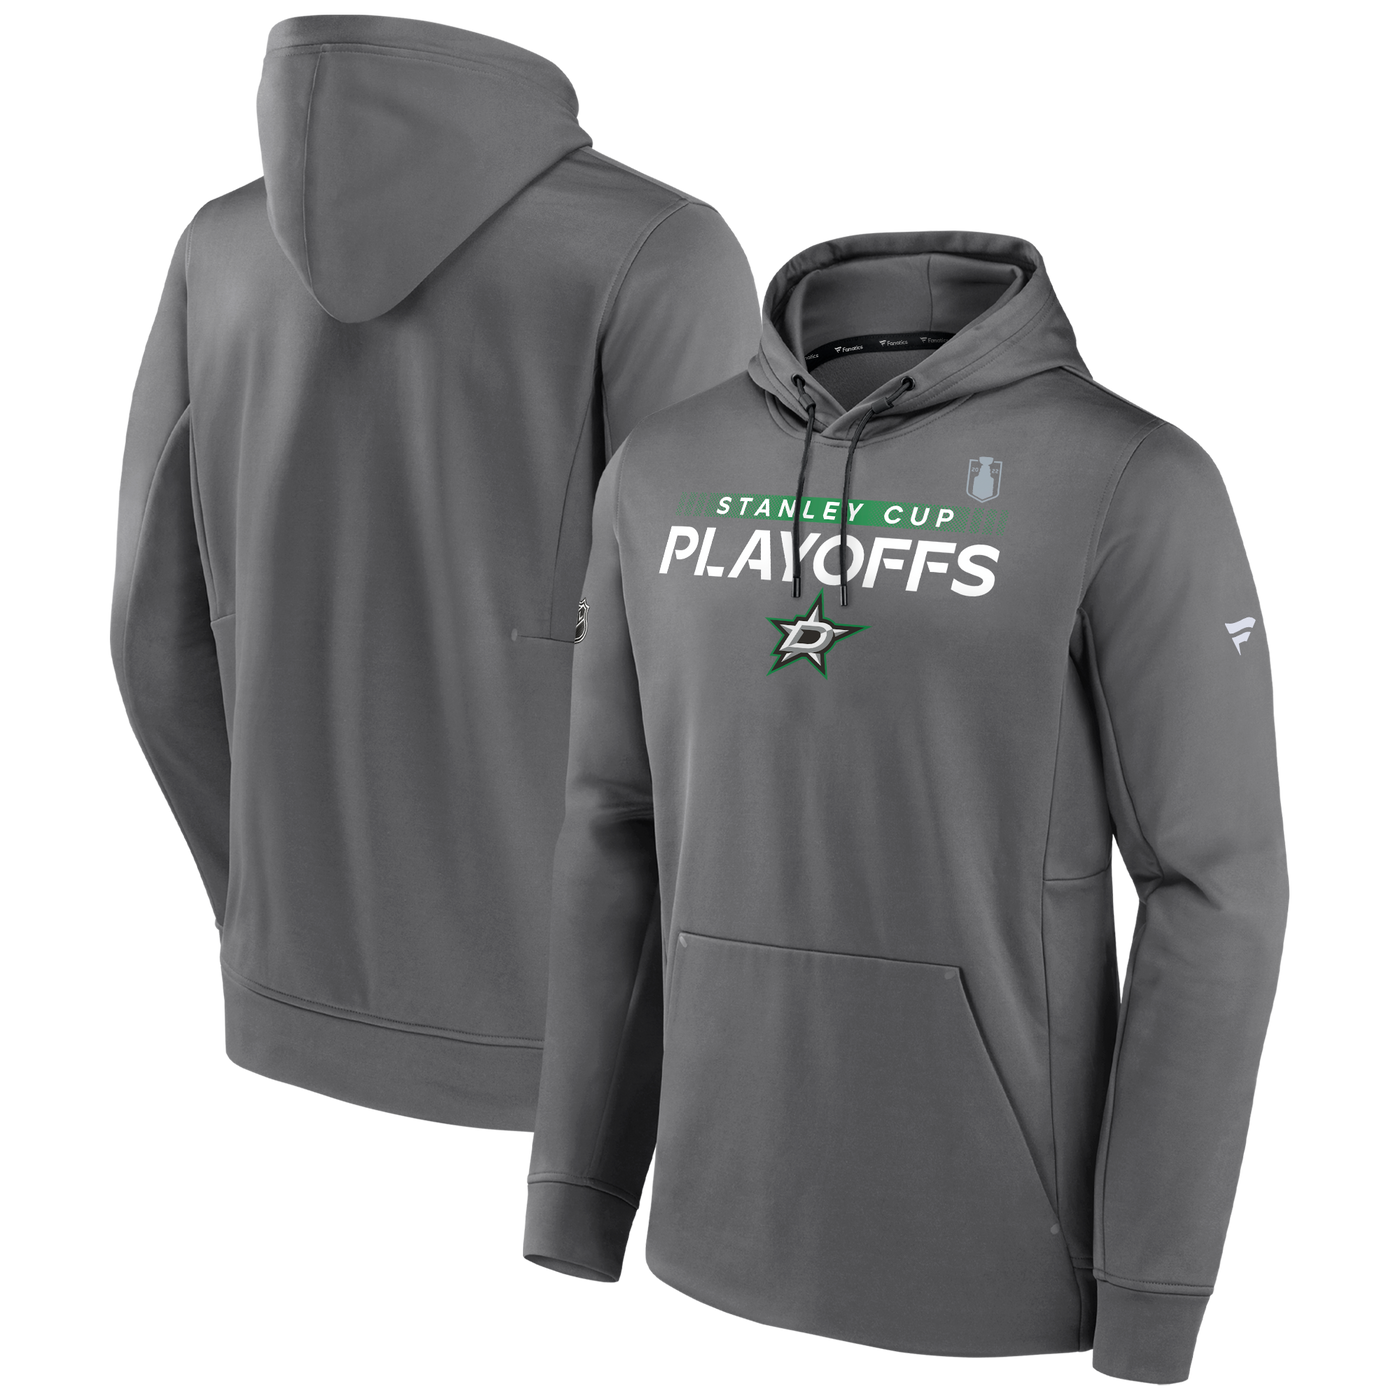 Dallas Stars Fanatics 21-22 Playoffs Ap Hoody in Gray - Front and Back View